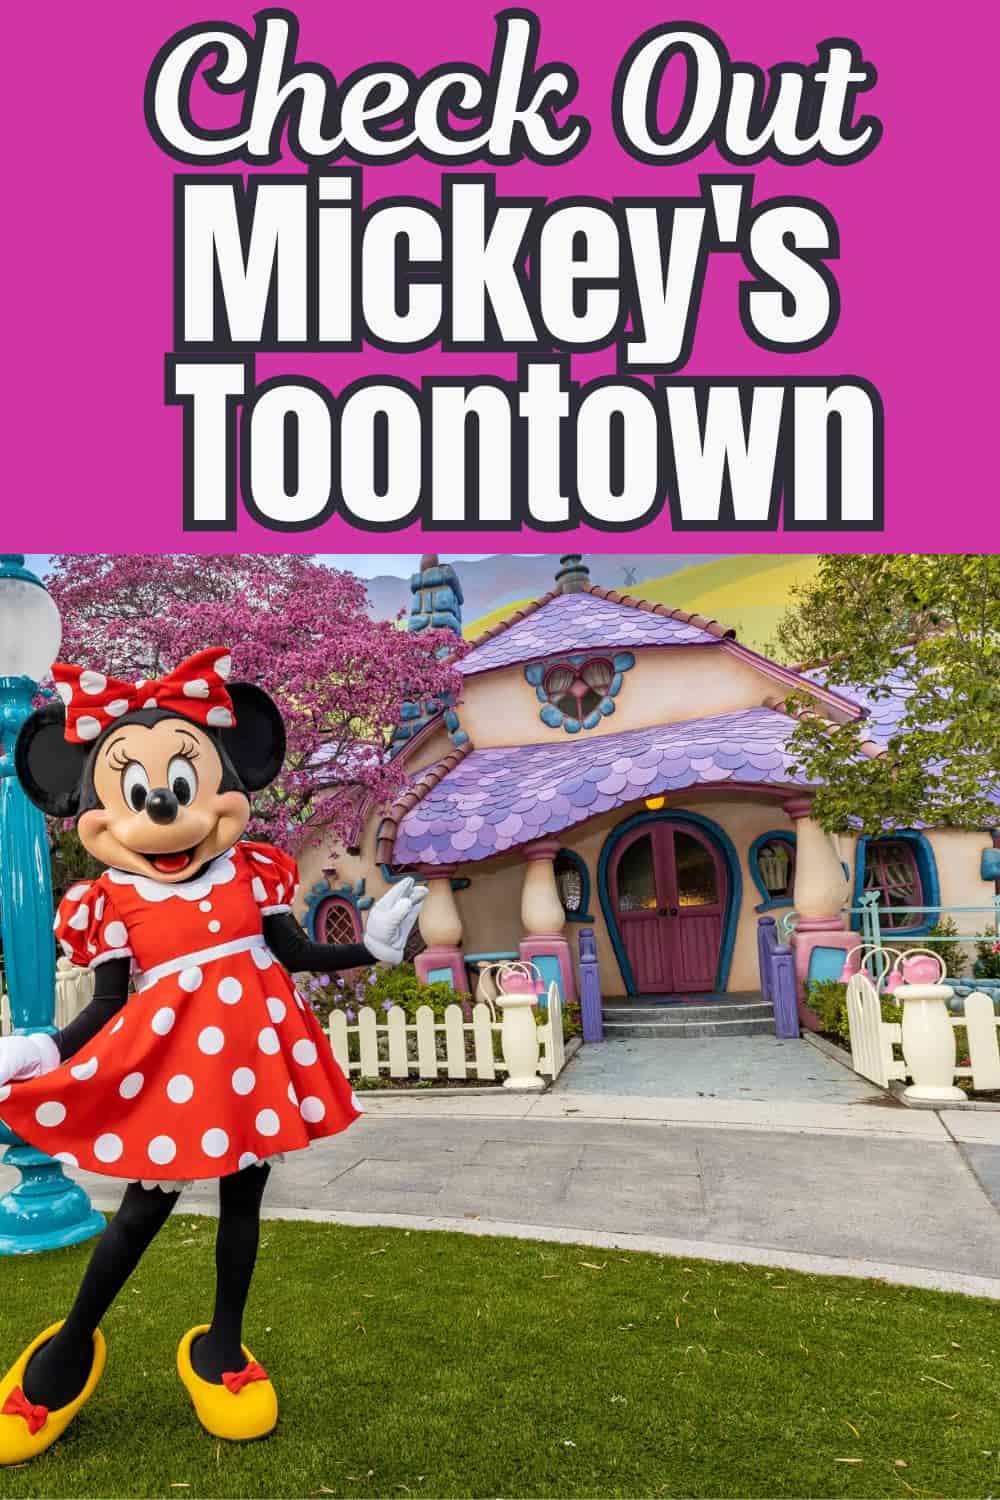 Check Out Mickey's Toontown in Disneyland